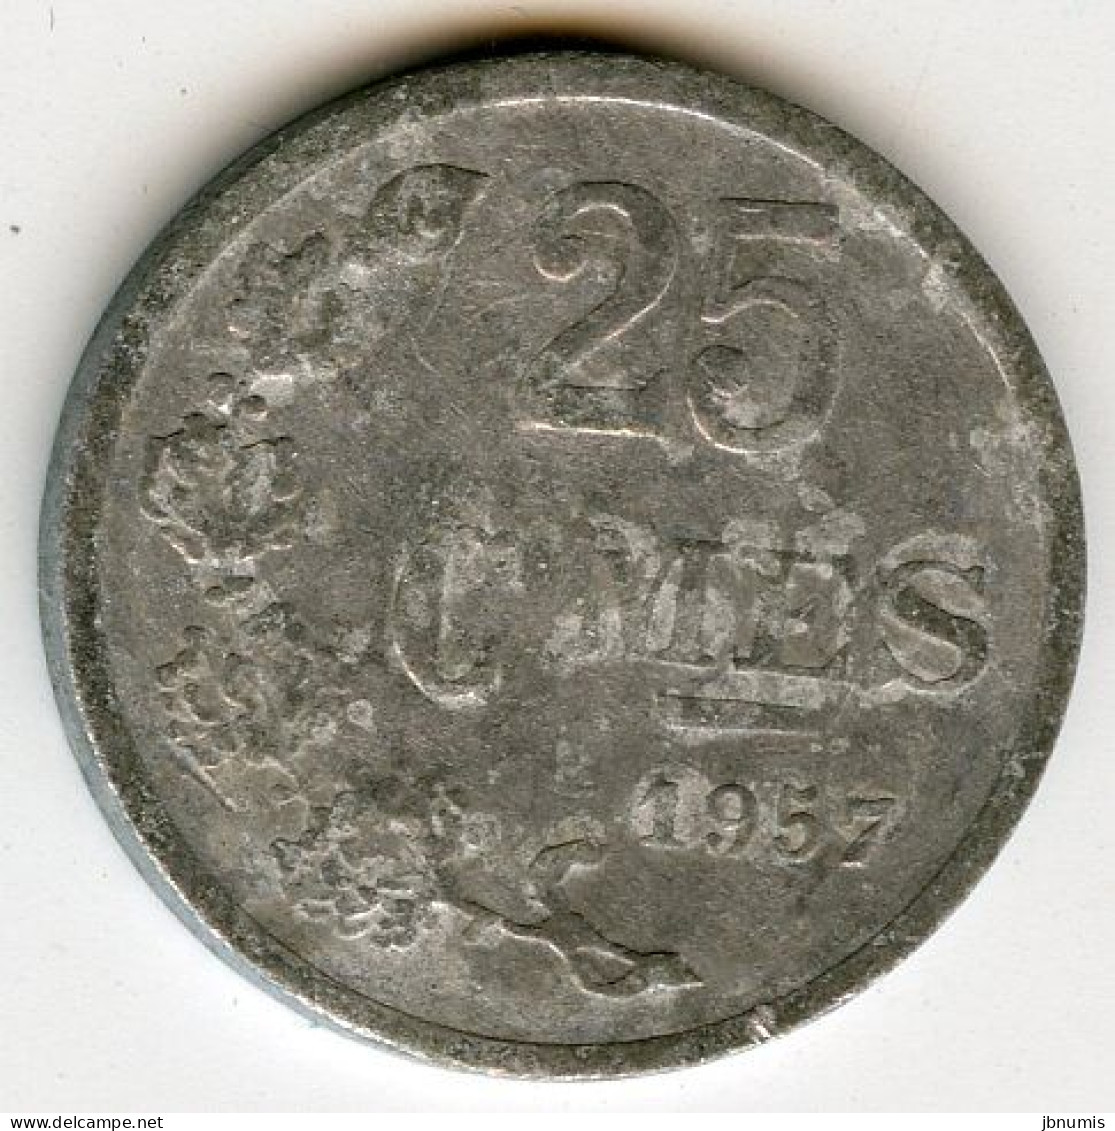 Luxembourg 25 Centimes 1957 KM 45a.1 - Luxembourg